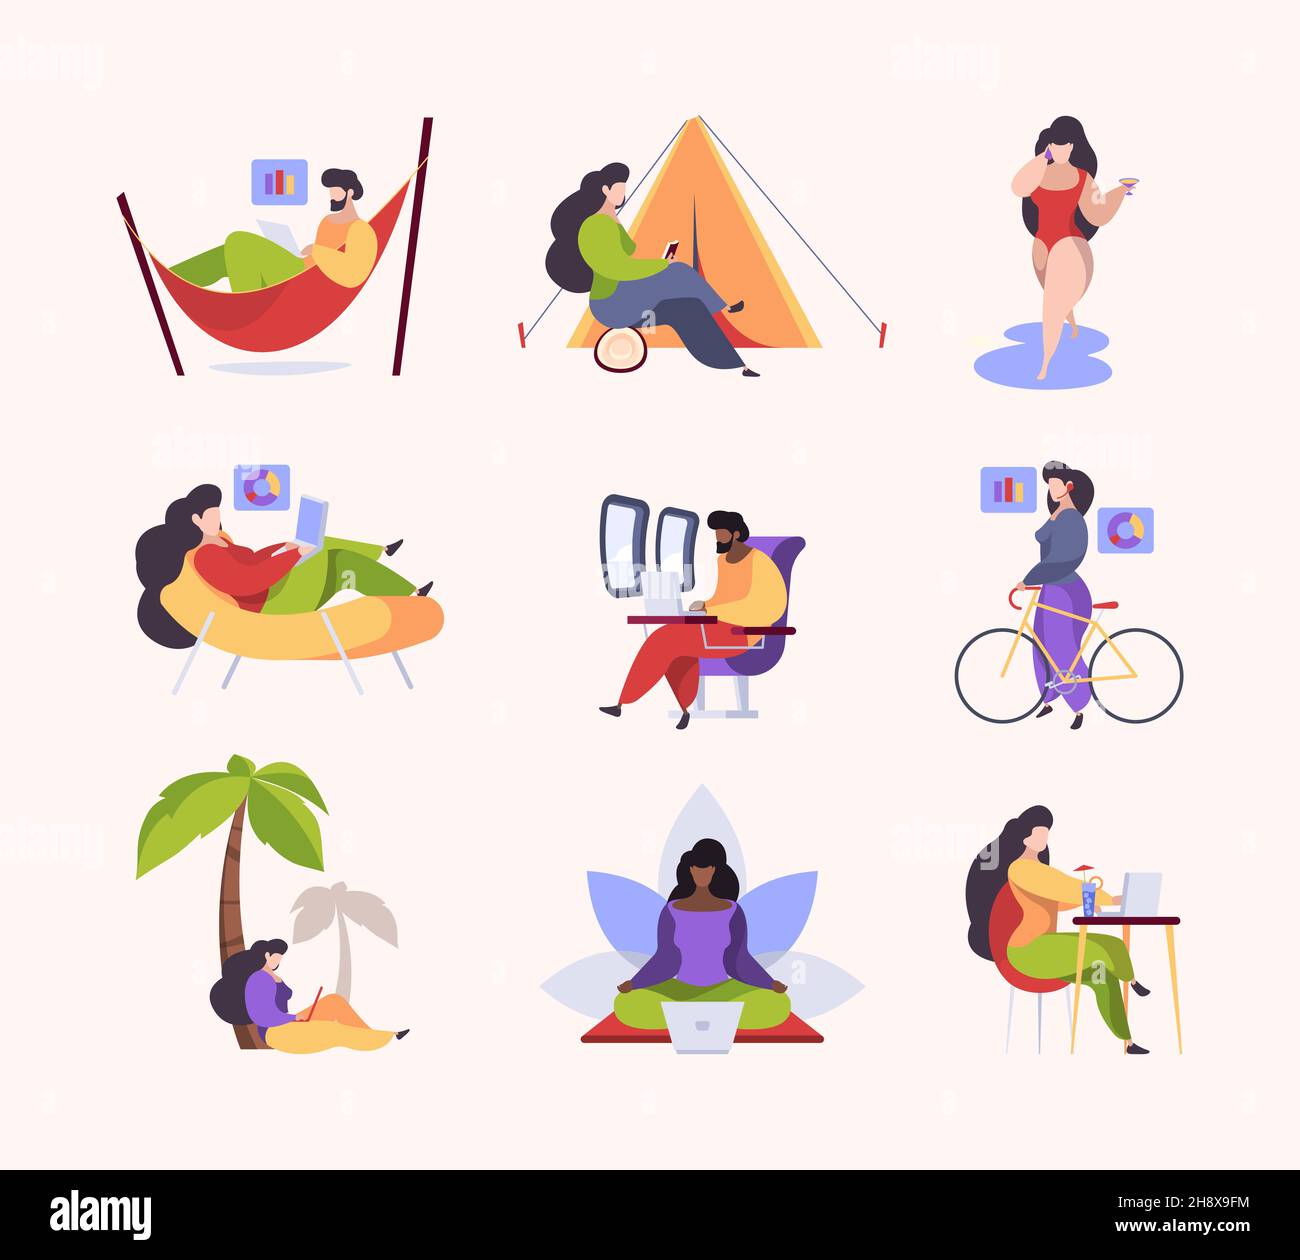 Simple lifestyle characters. Expensive family downshifting relax time freelancers working garish vector flat illustrations metaphores collection Stock Vector